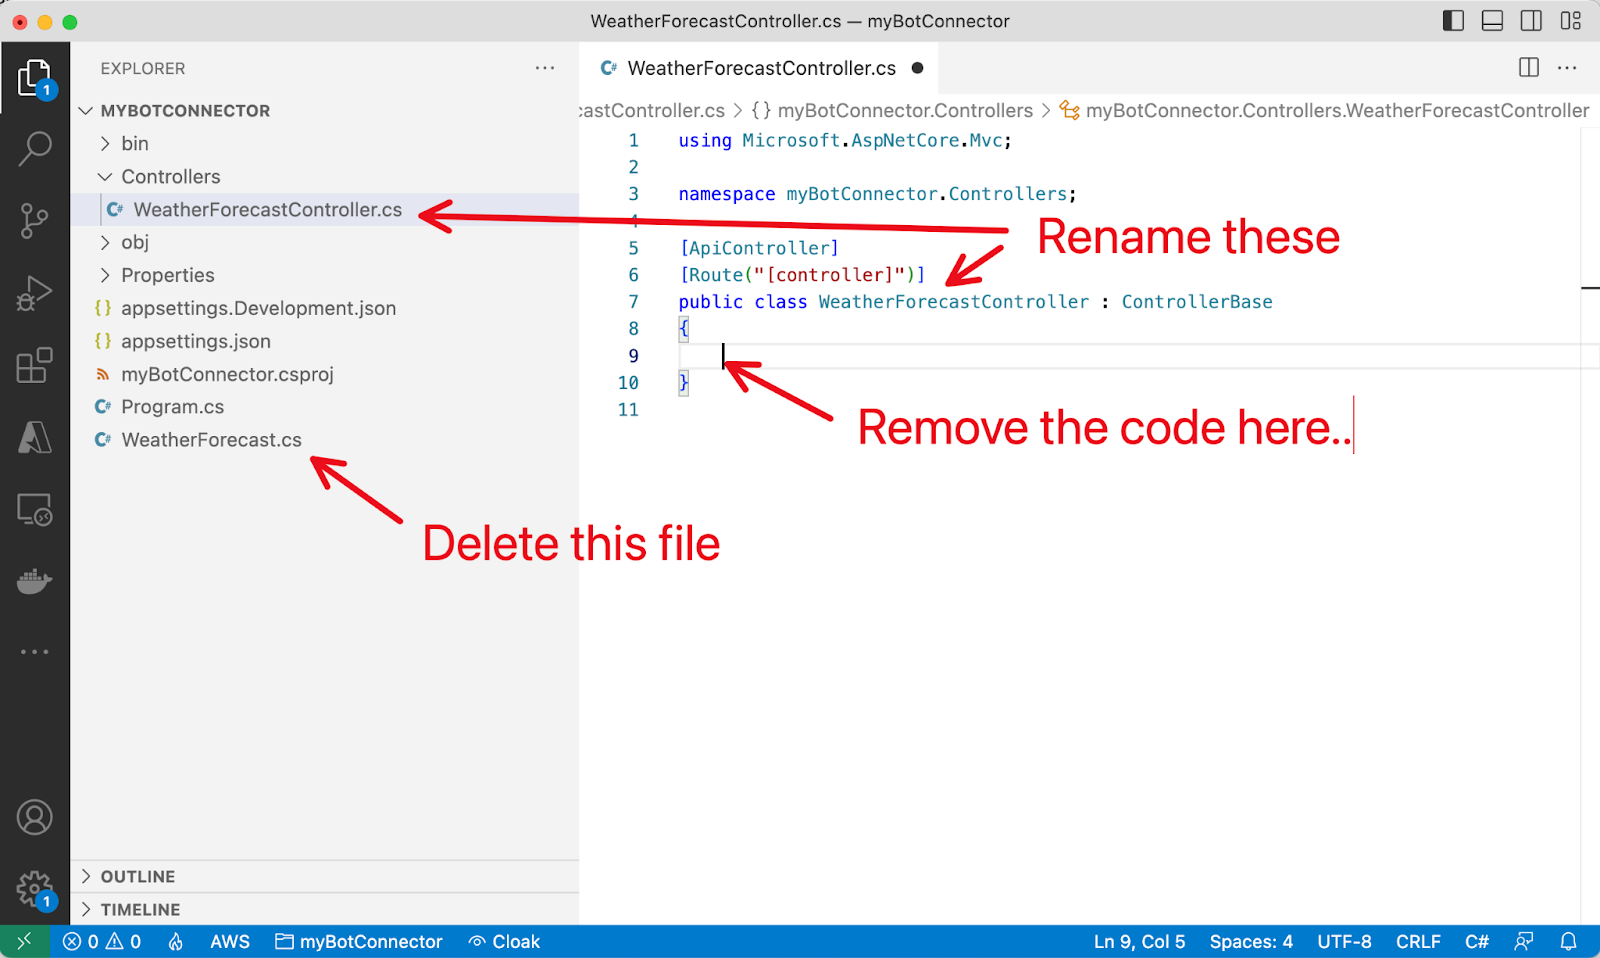 Rename and Remove Unwanted Files and Code